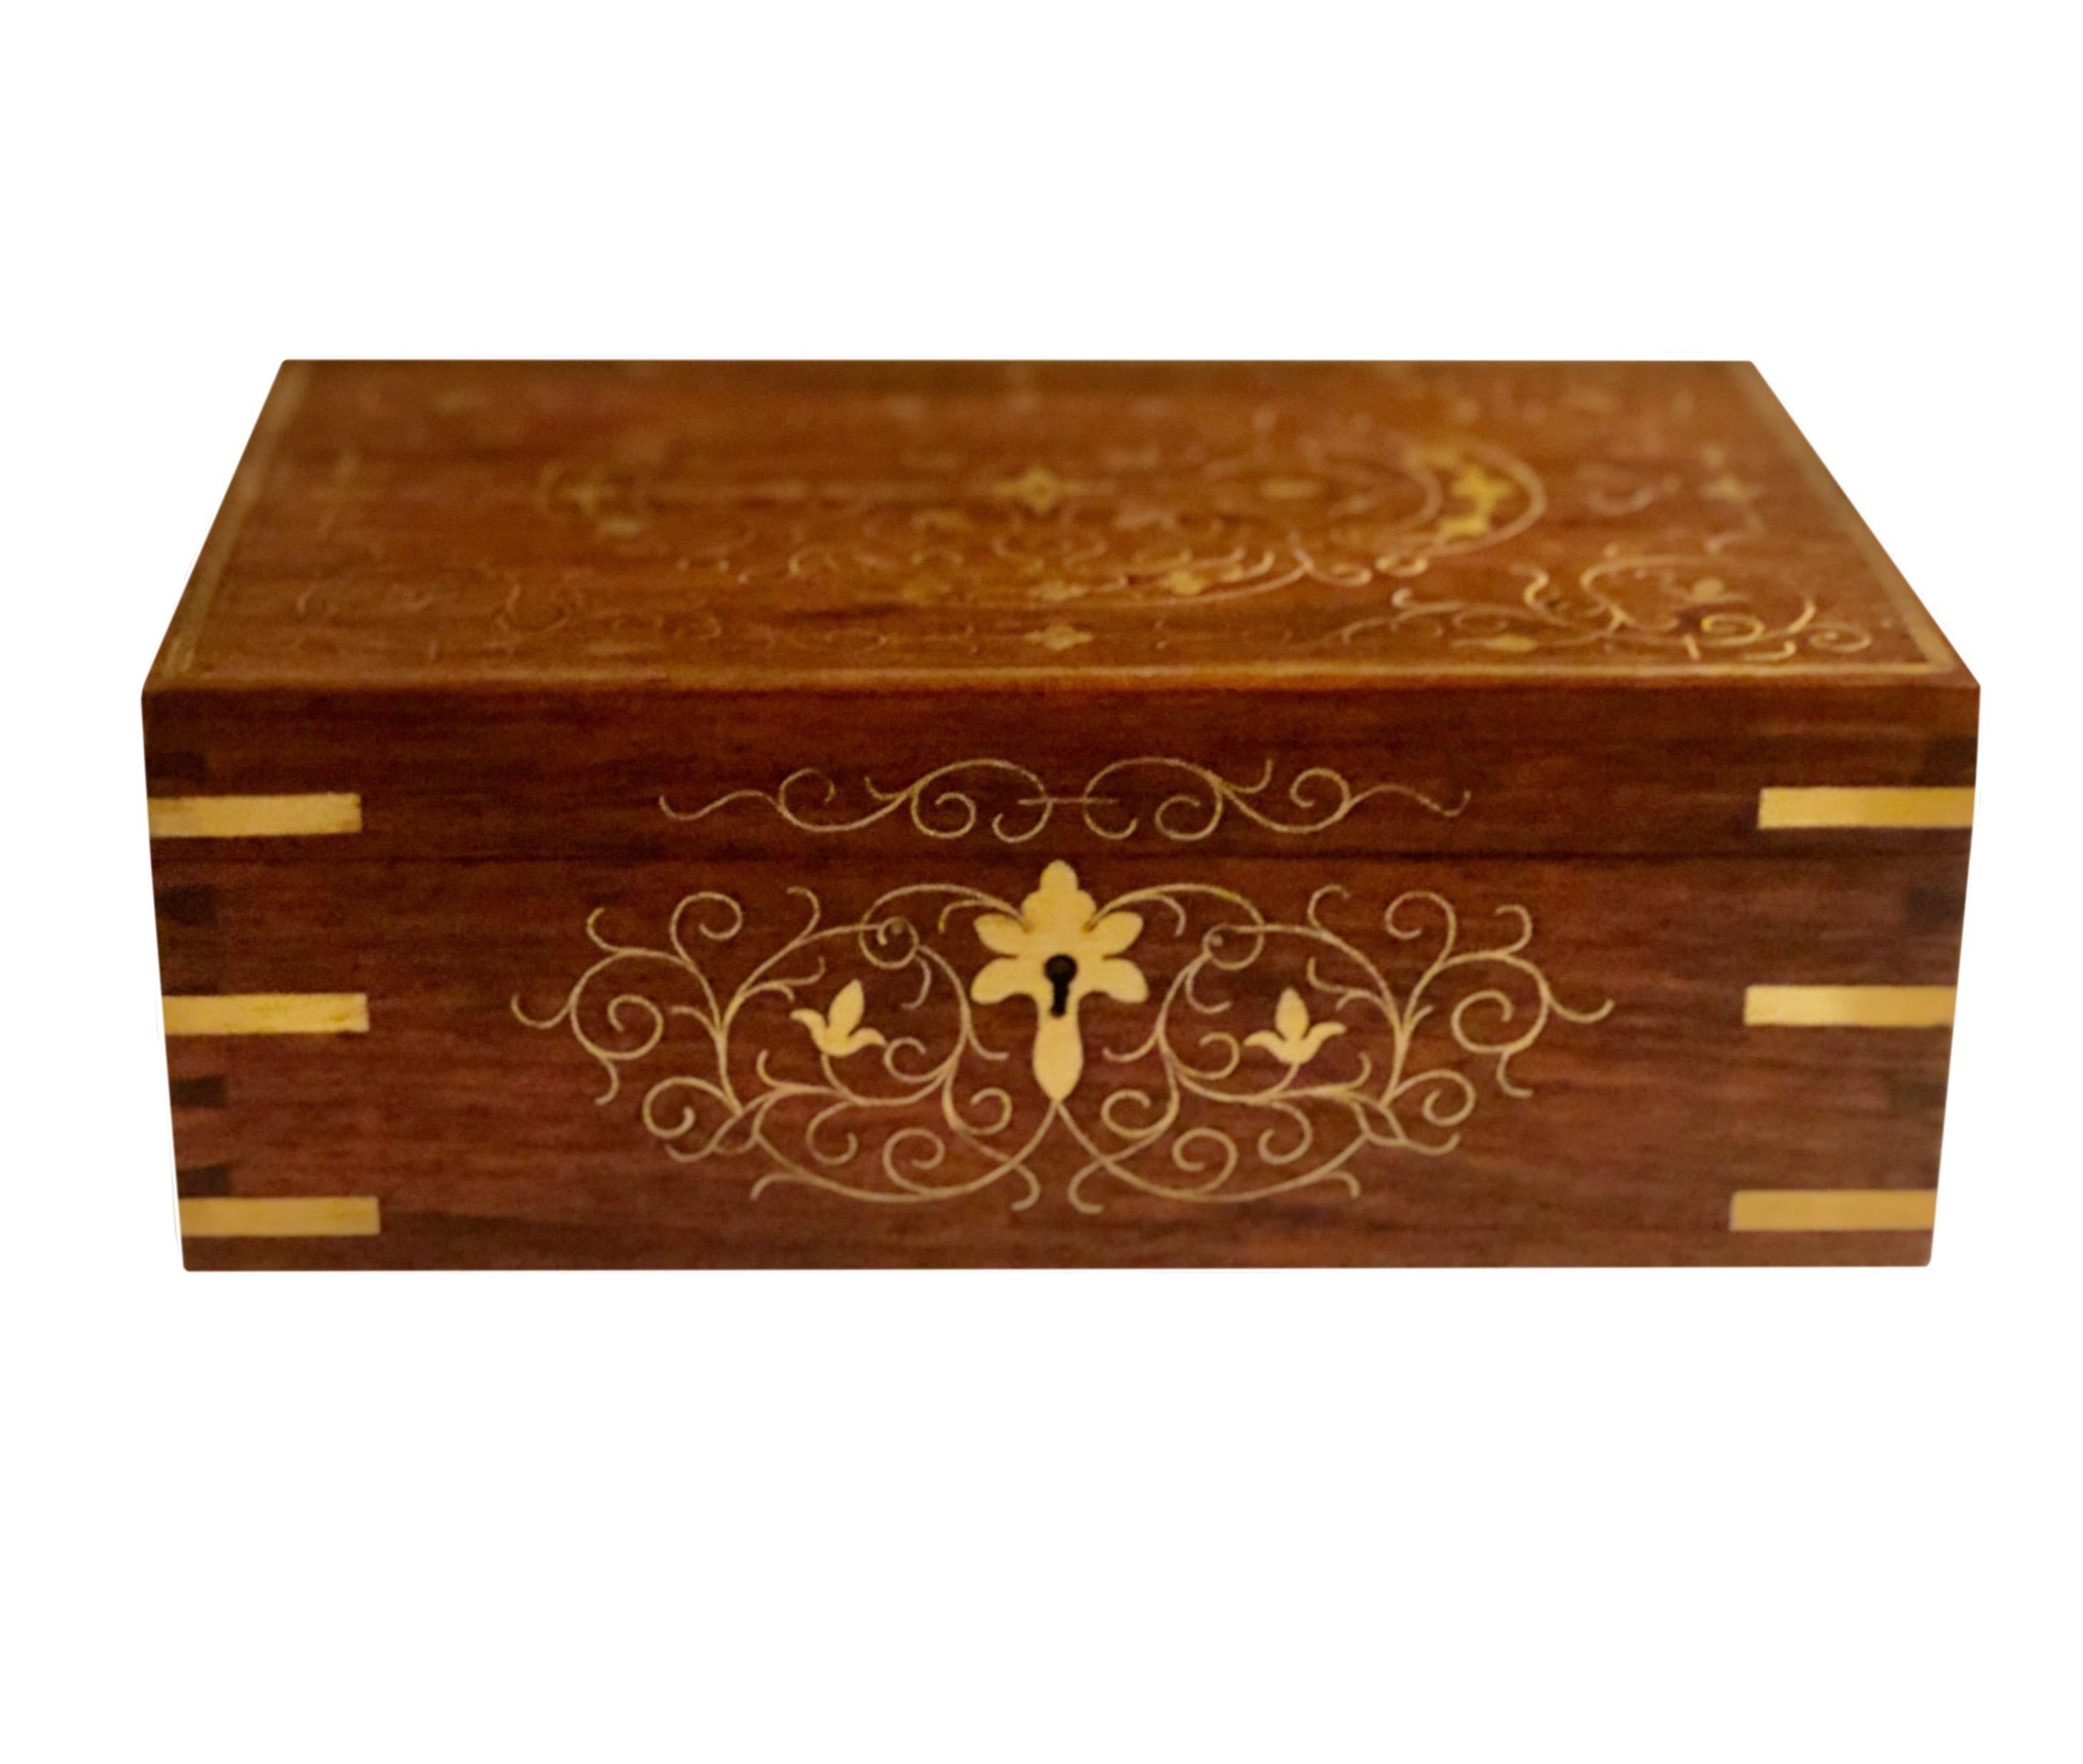 An Anglo Indian Rosewood box circa late 19th century. The gilt design of florals and scrolls on the top carriers through to all four sides so will display nicely on a desk or table. The box has two levels with the original key taped inside and is in